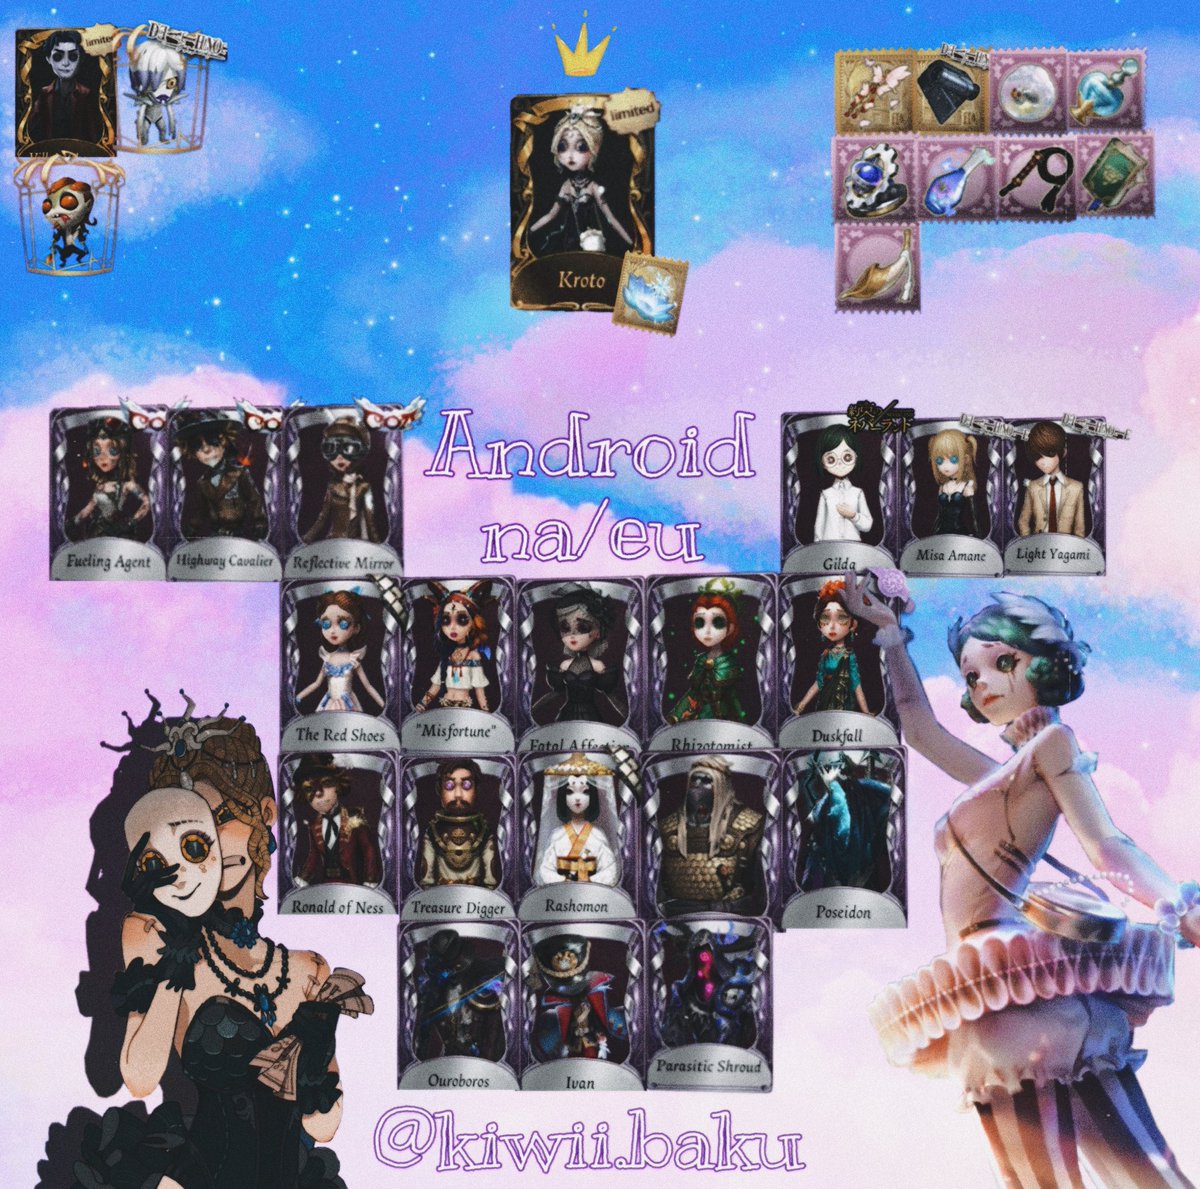 ♧ looking for idv accounts with S skins (no recent skins I'll only accept naiad in a bigger account)

♧ please no lowballs <3

♧ I really like sound wave!!

#idvtrade #idvtrading